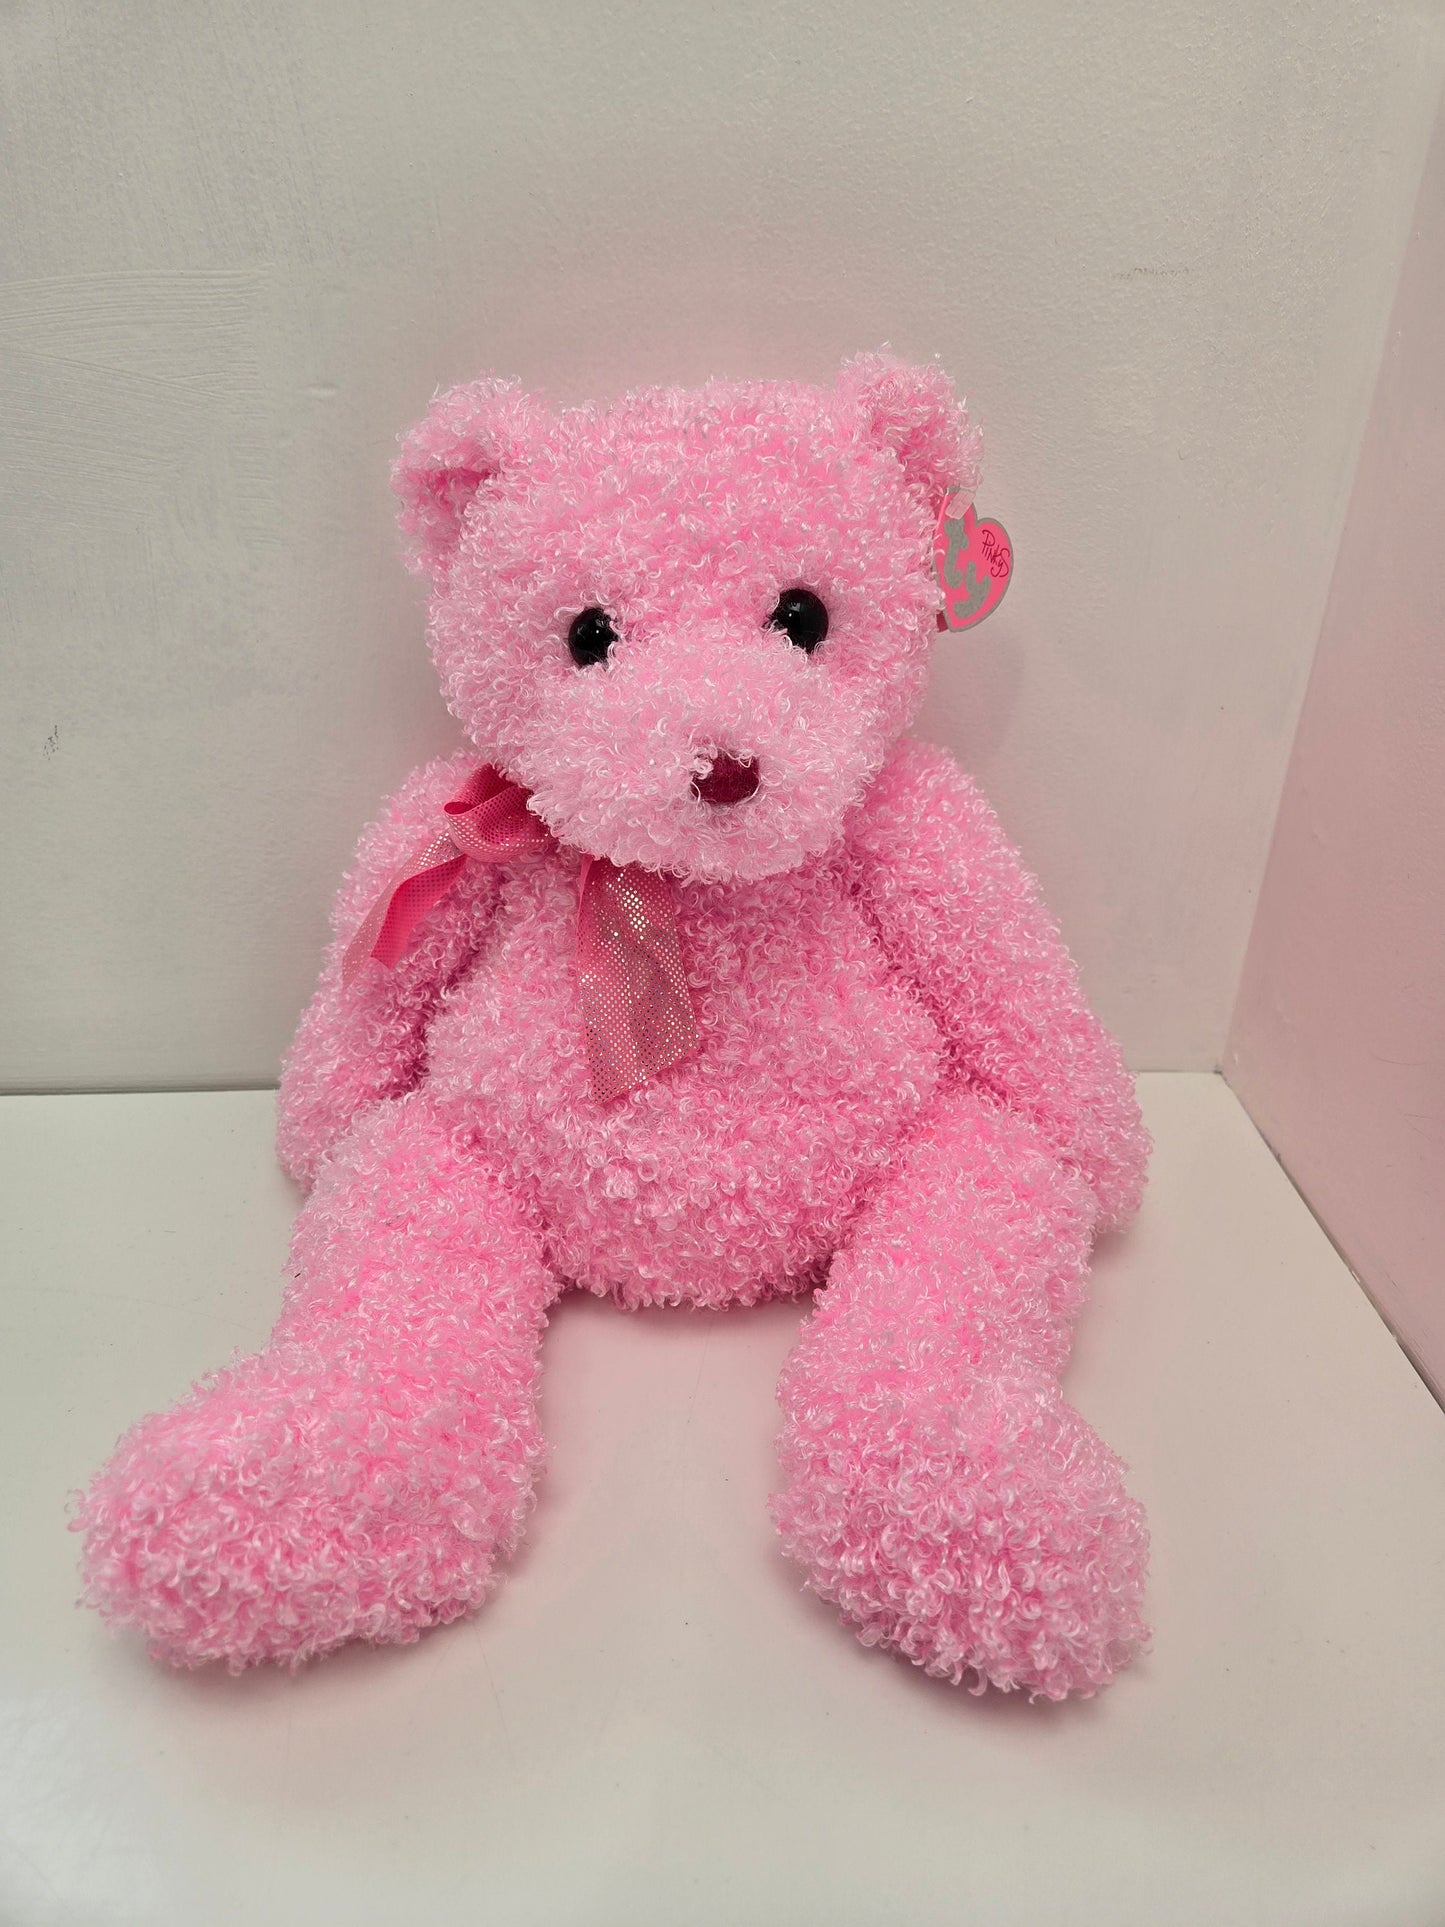 TY Pinkys Collection “Shimmers” the Large Pink Bear (15 inch)